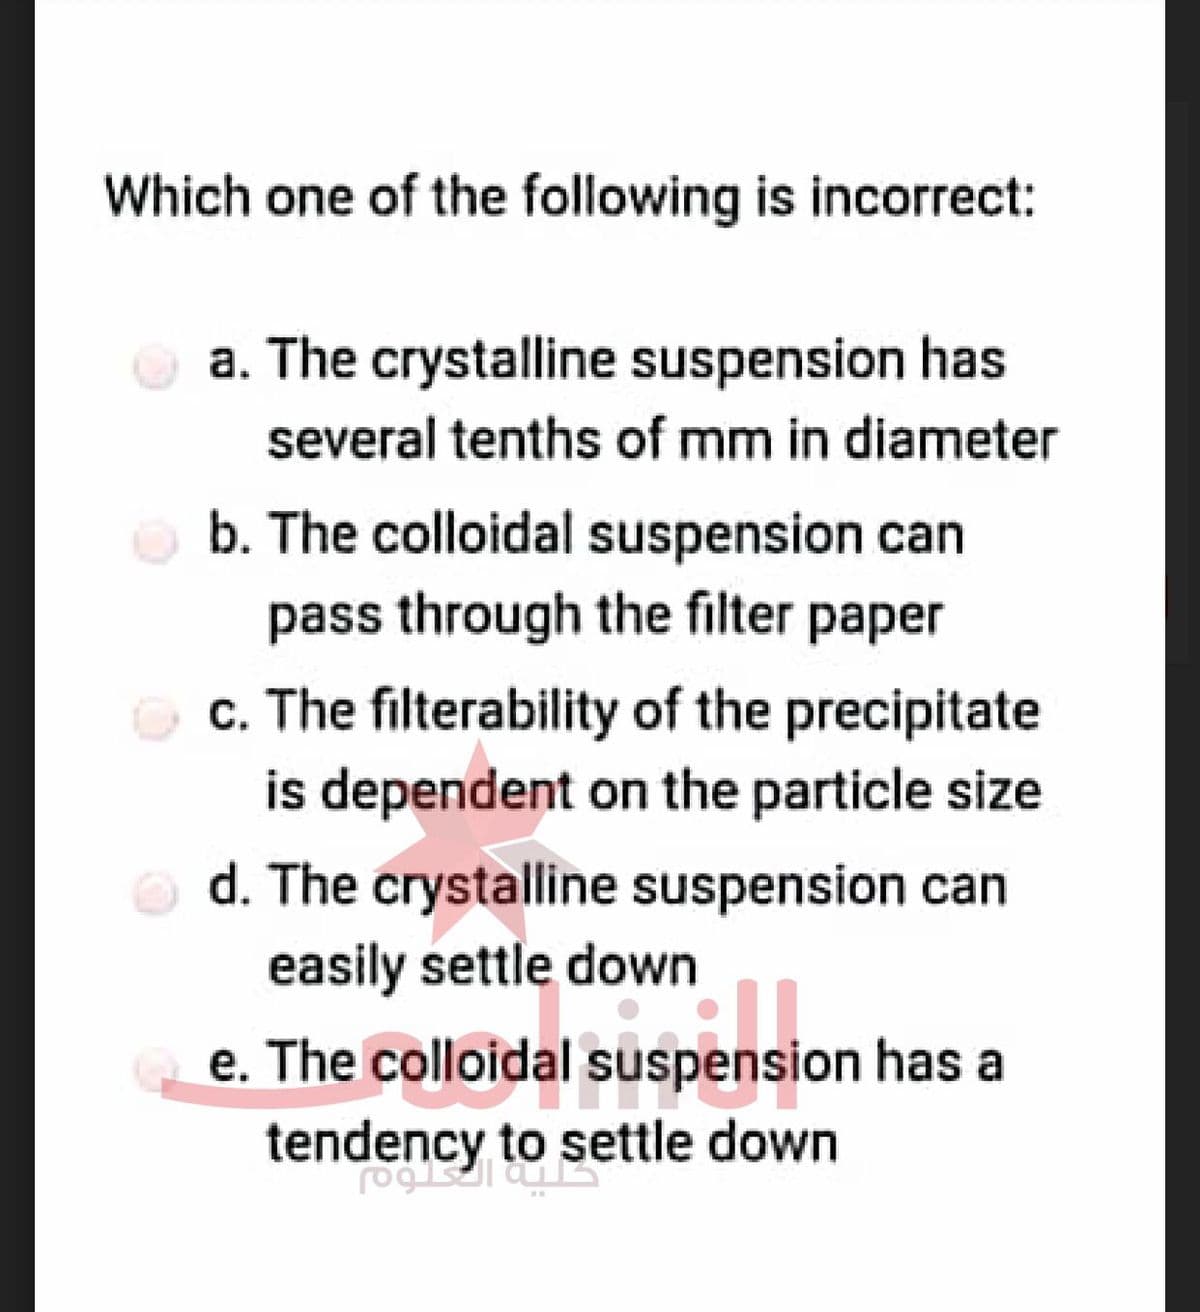 Which one of the following is incorrect:
a. The crystalline suspension has
several tenths of mm in diameter
b. The colloidal suspension can
pass through the filter paper
c. The filterability of the precipitate
is dependent on the particle size
d. The crystalline suspension can
easily settle down
e. The colloidal suspension has al
dal suspension
tendency to settle down
foglalaust